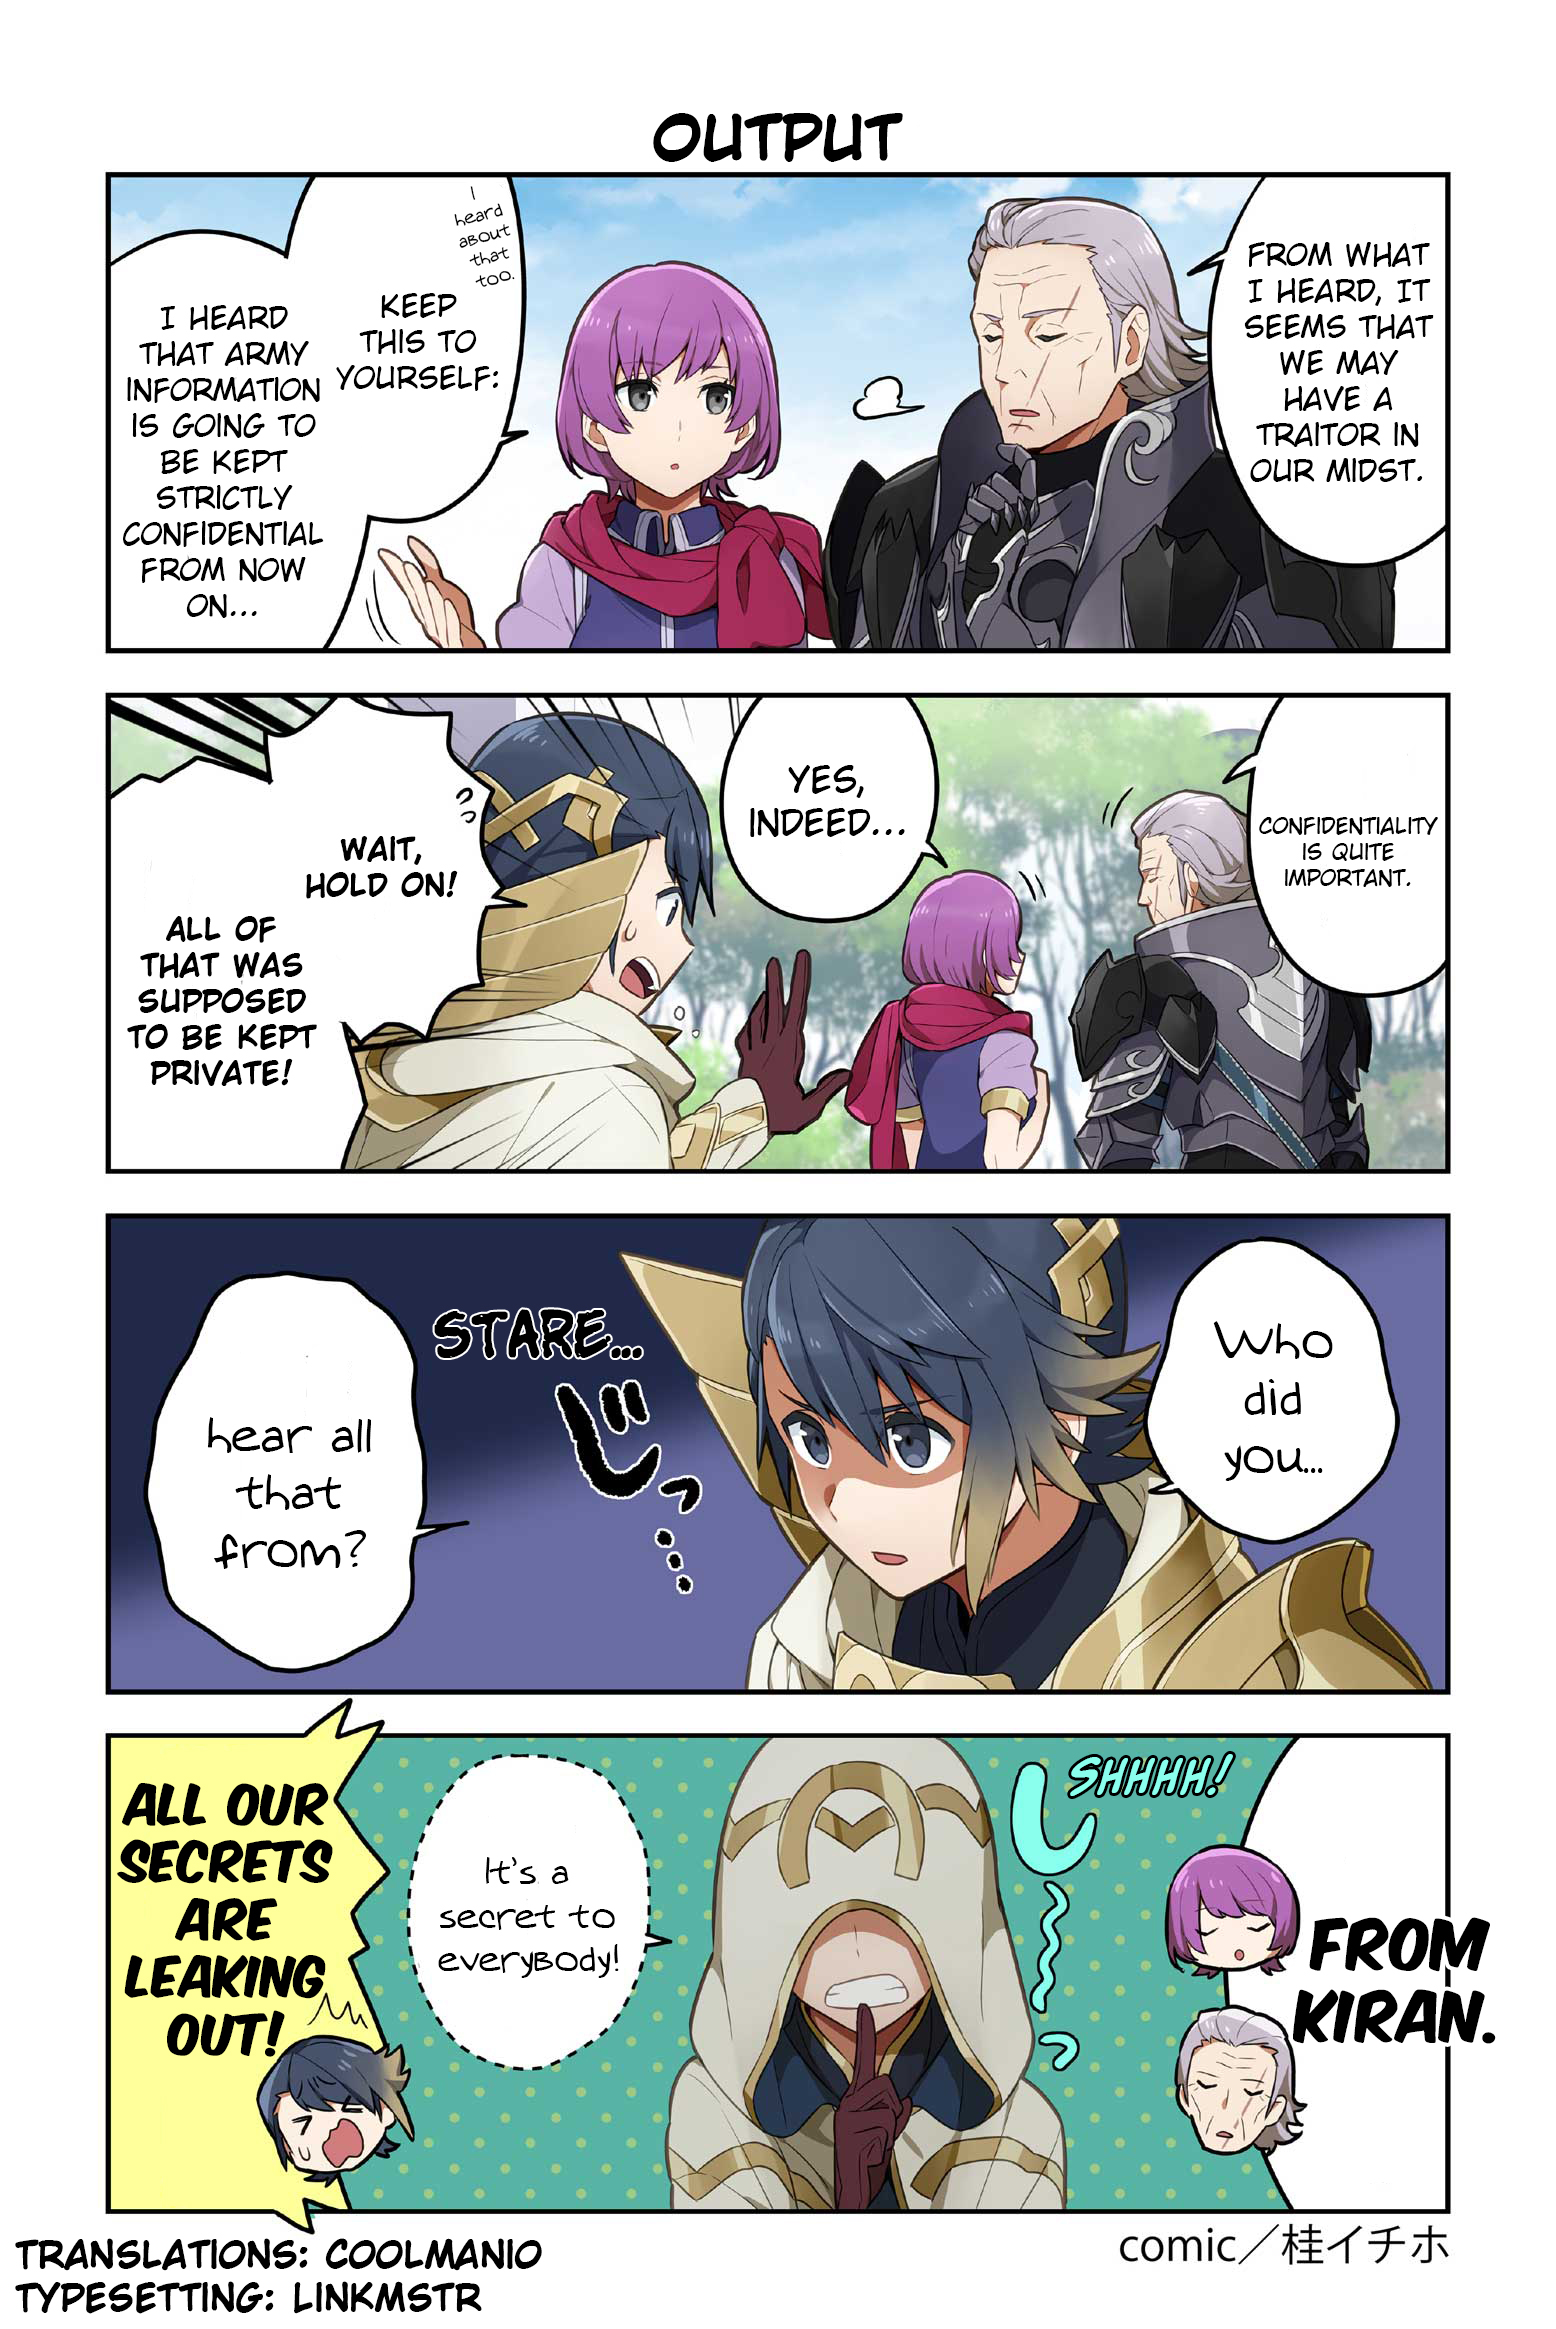 Fire Emblem Heroes Daily Lives of the Heroes Chapter 66: Output